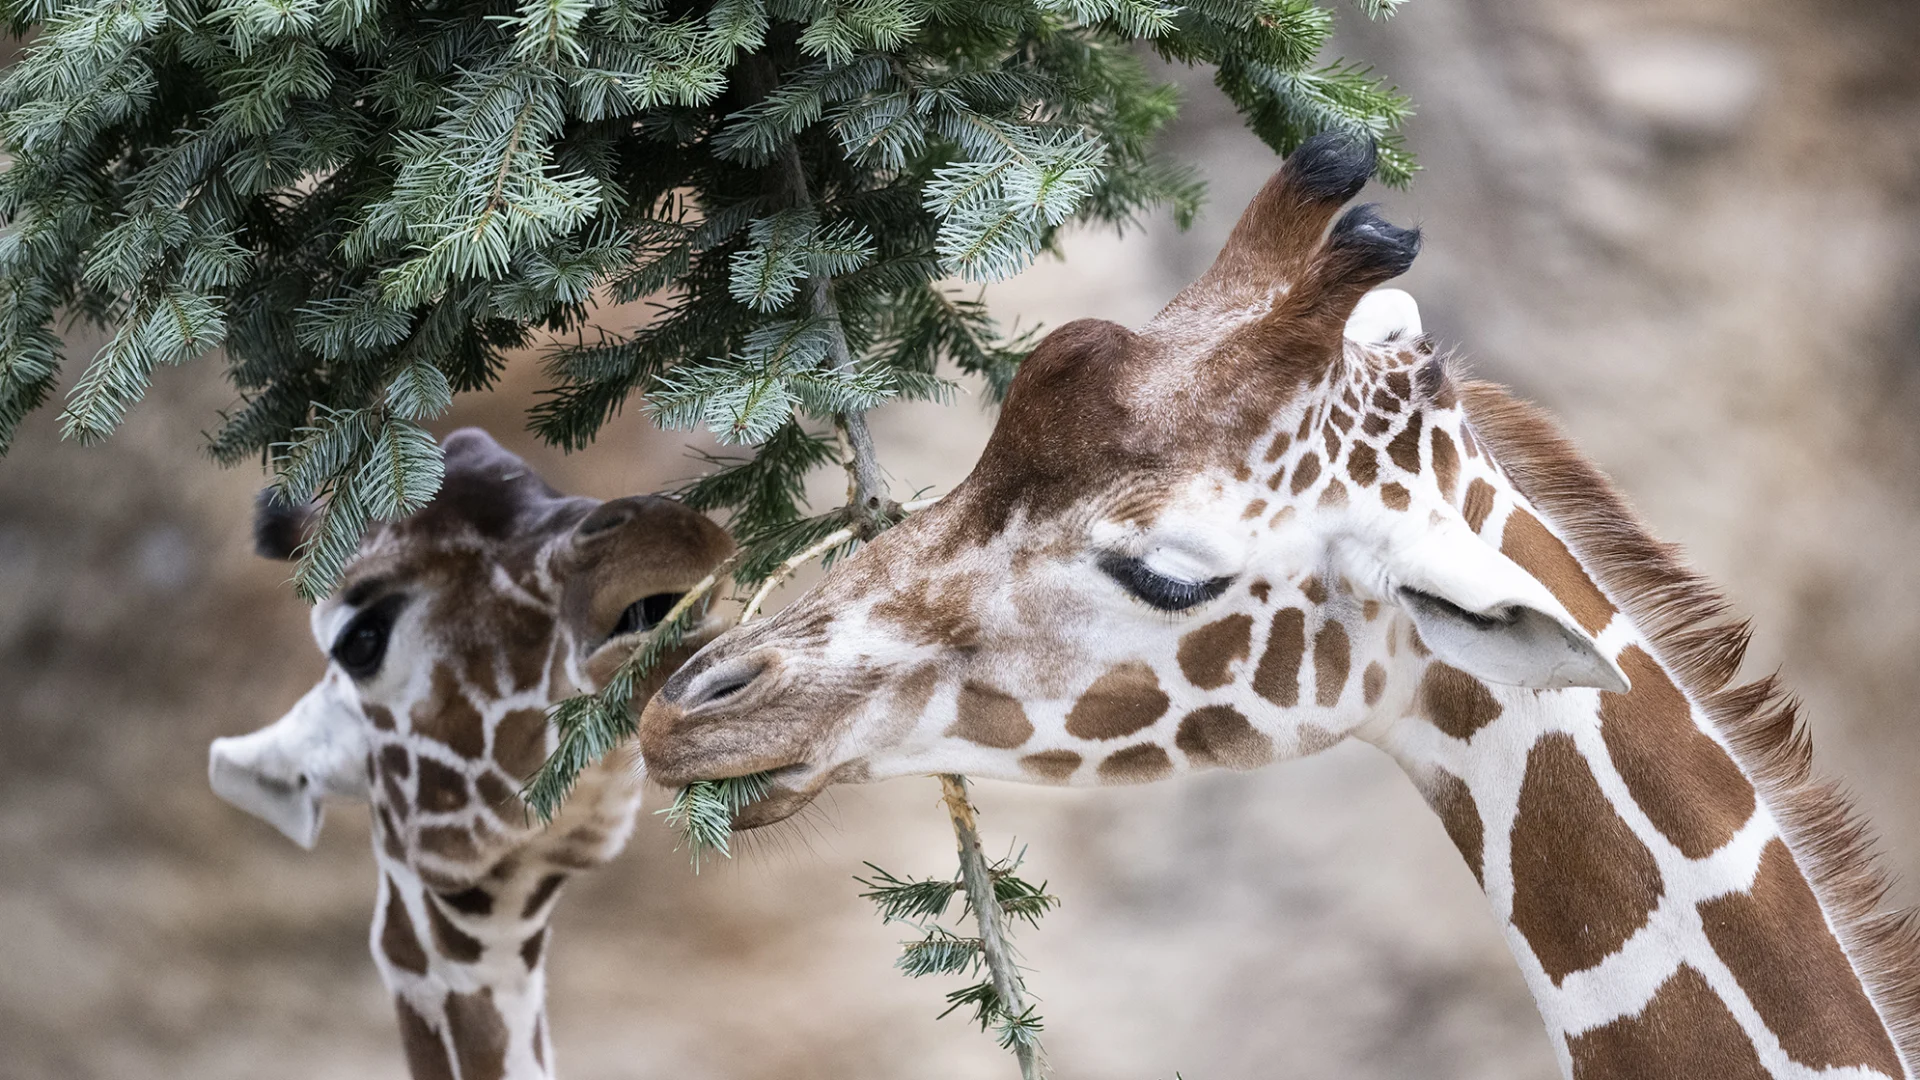 Giraffes at Zoo Zurich nibble on Christmas tree needles.